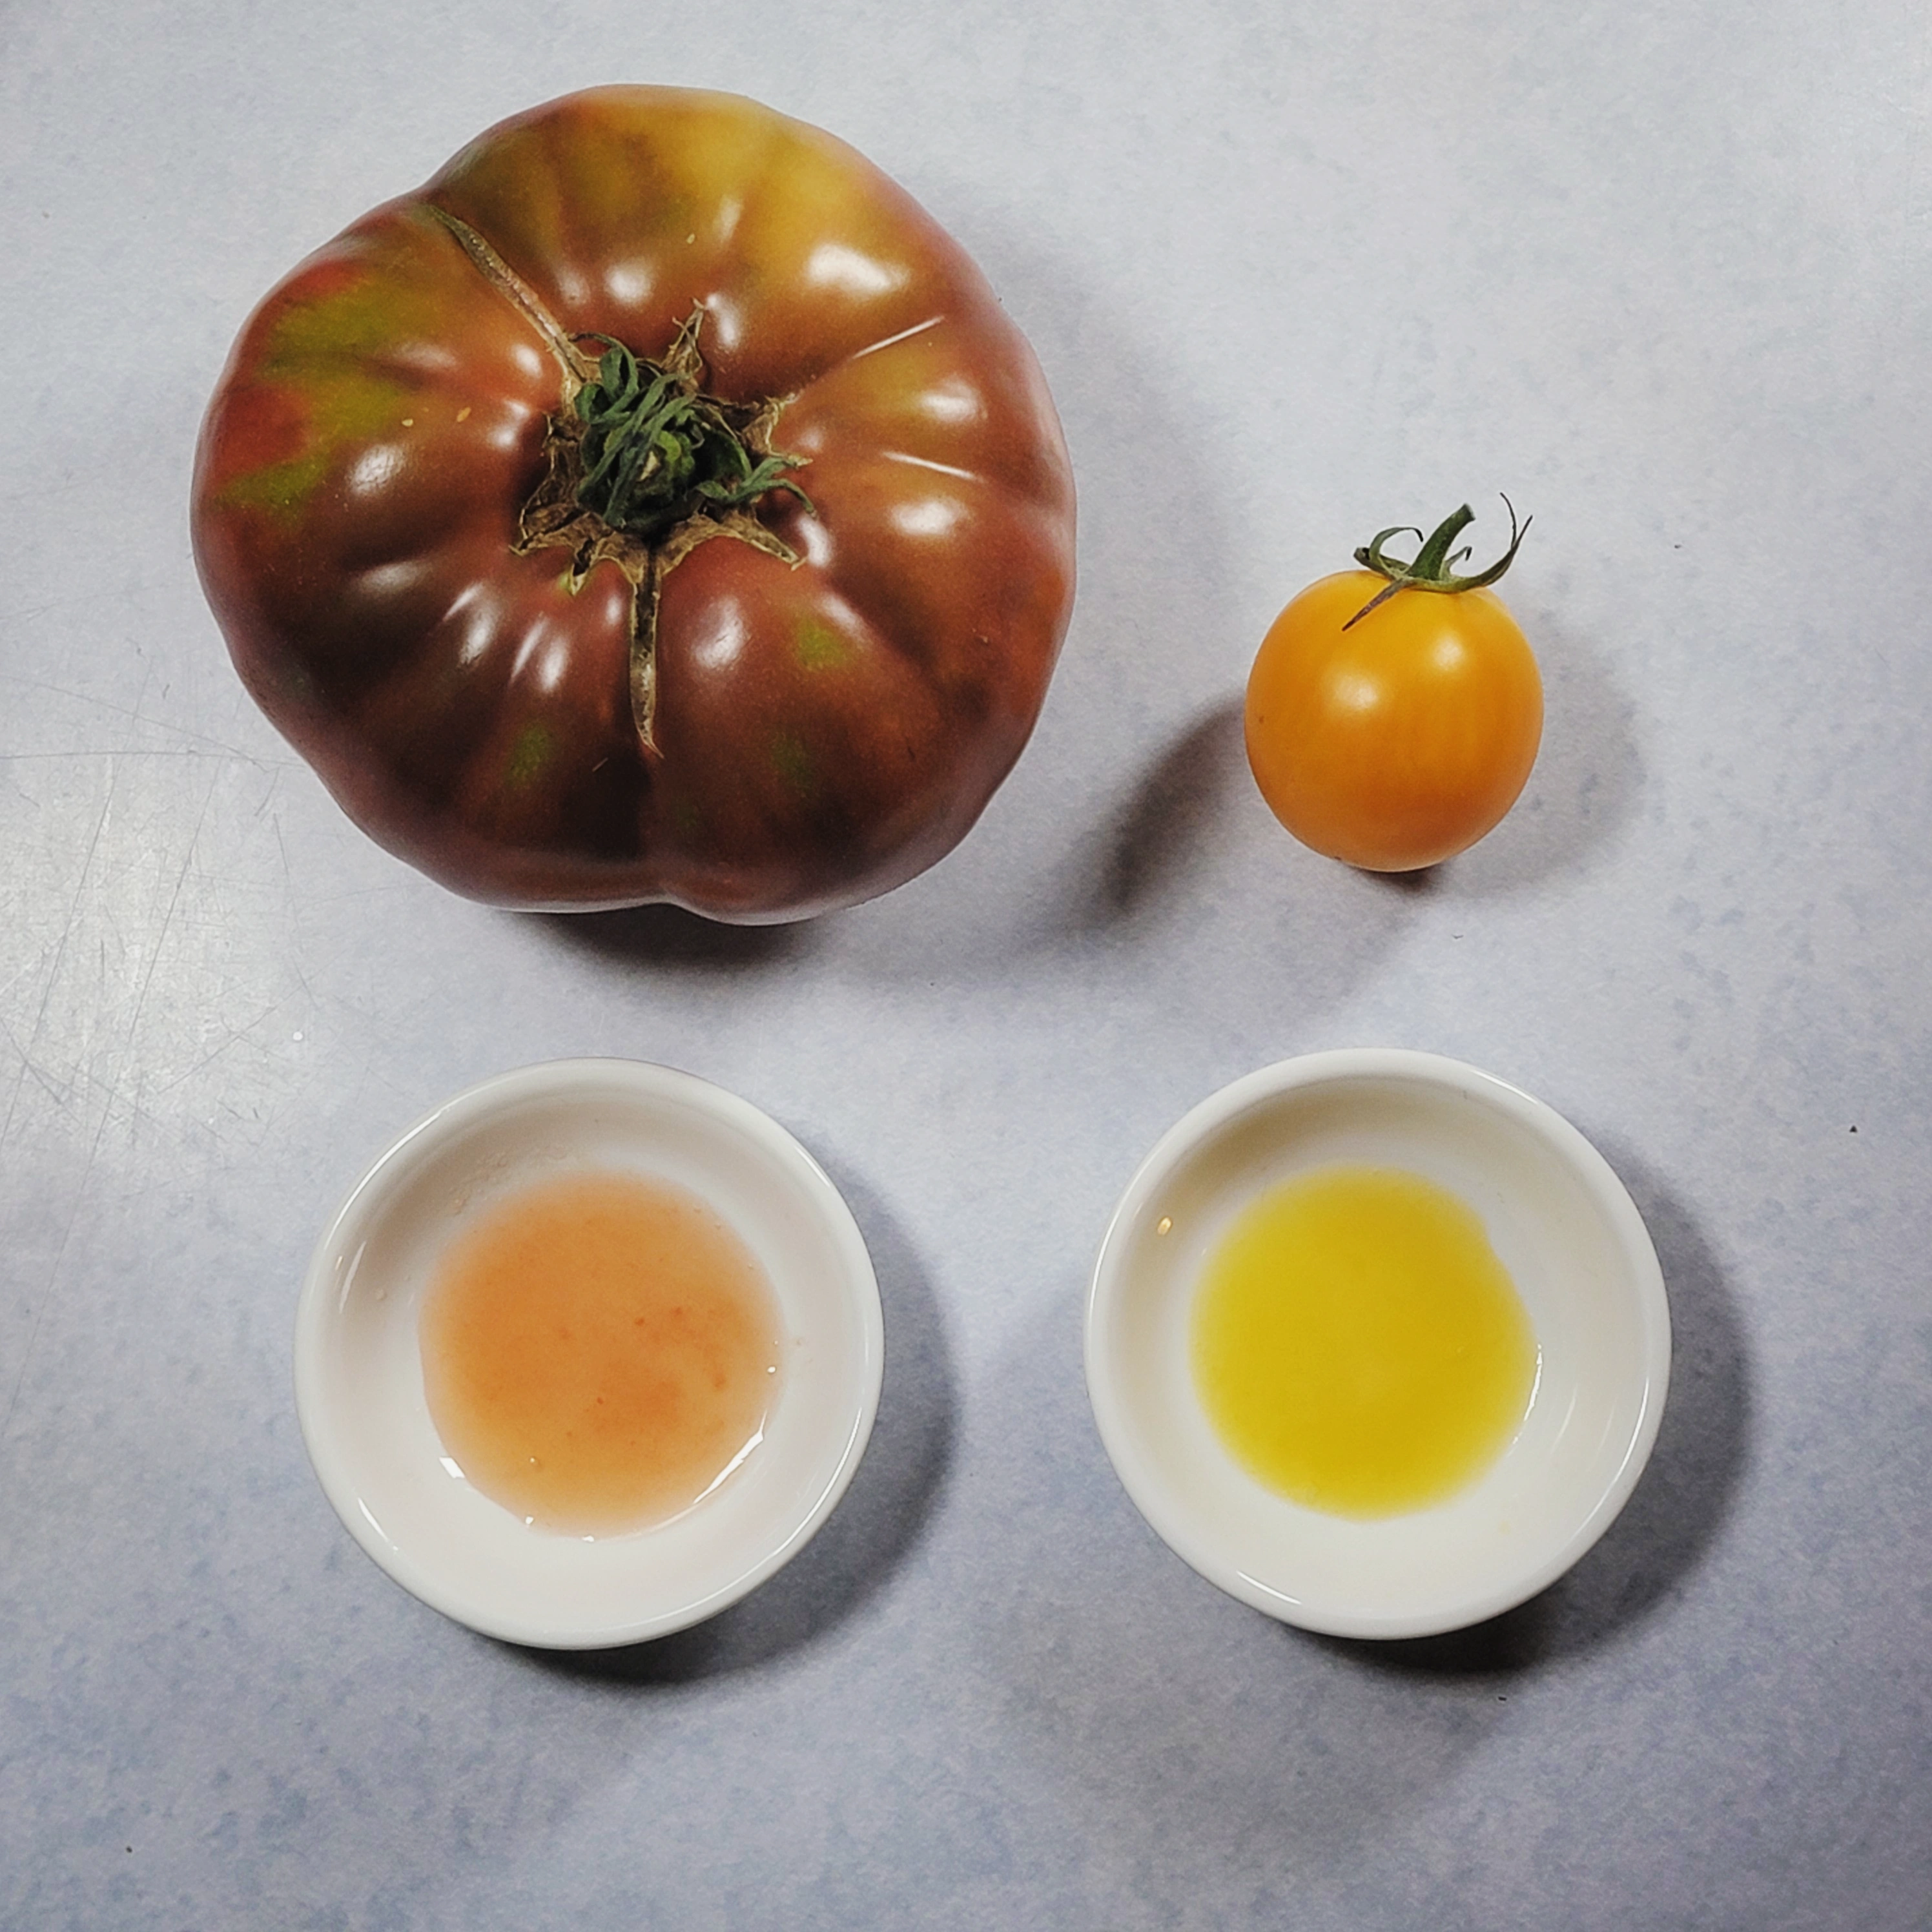 Beefsteak (Cherokee Purple) tomato next to cherry (Honey Drop) tomato, separately juiced into dishes to test with the refractometer.